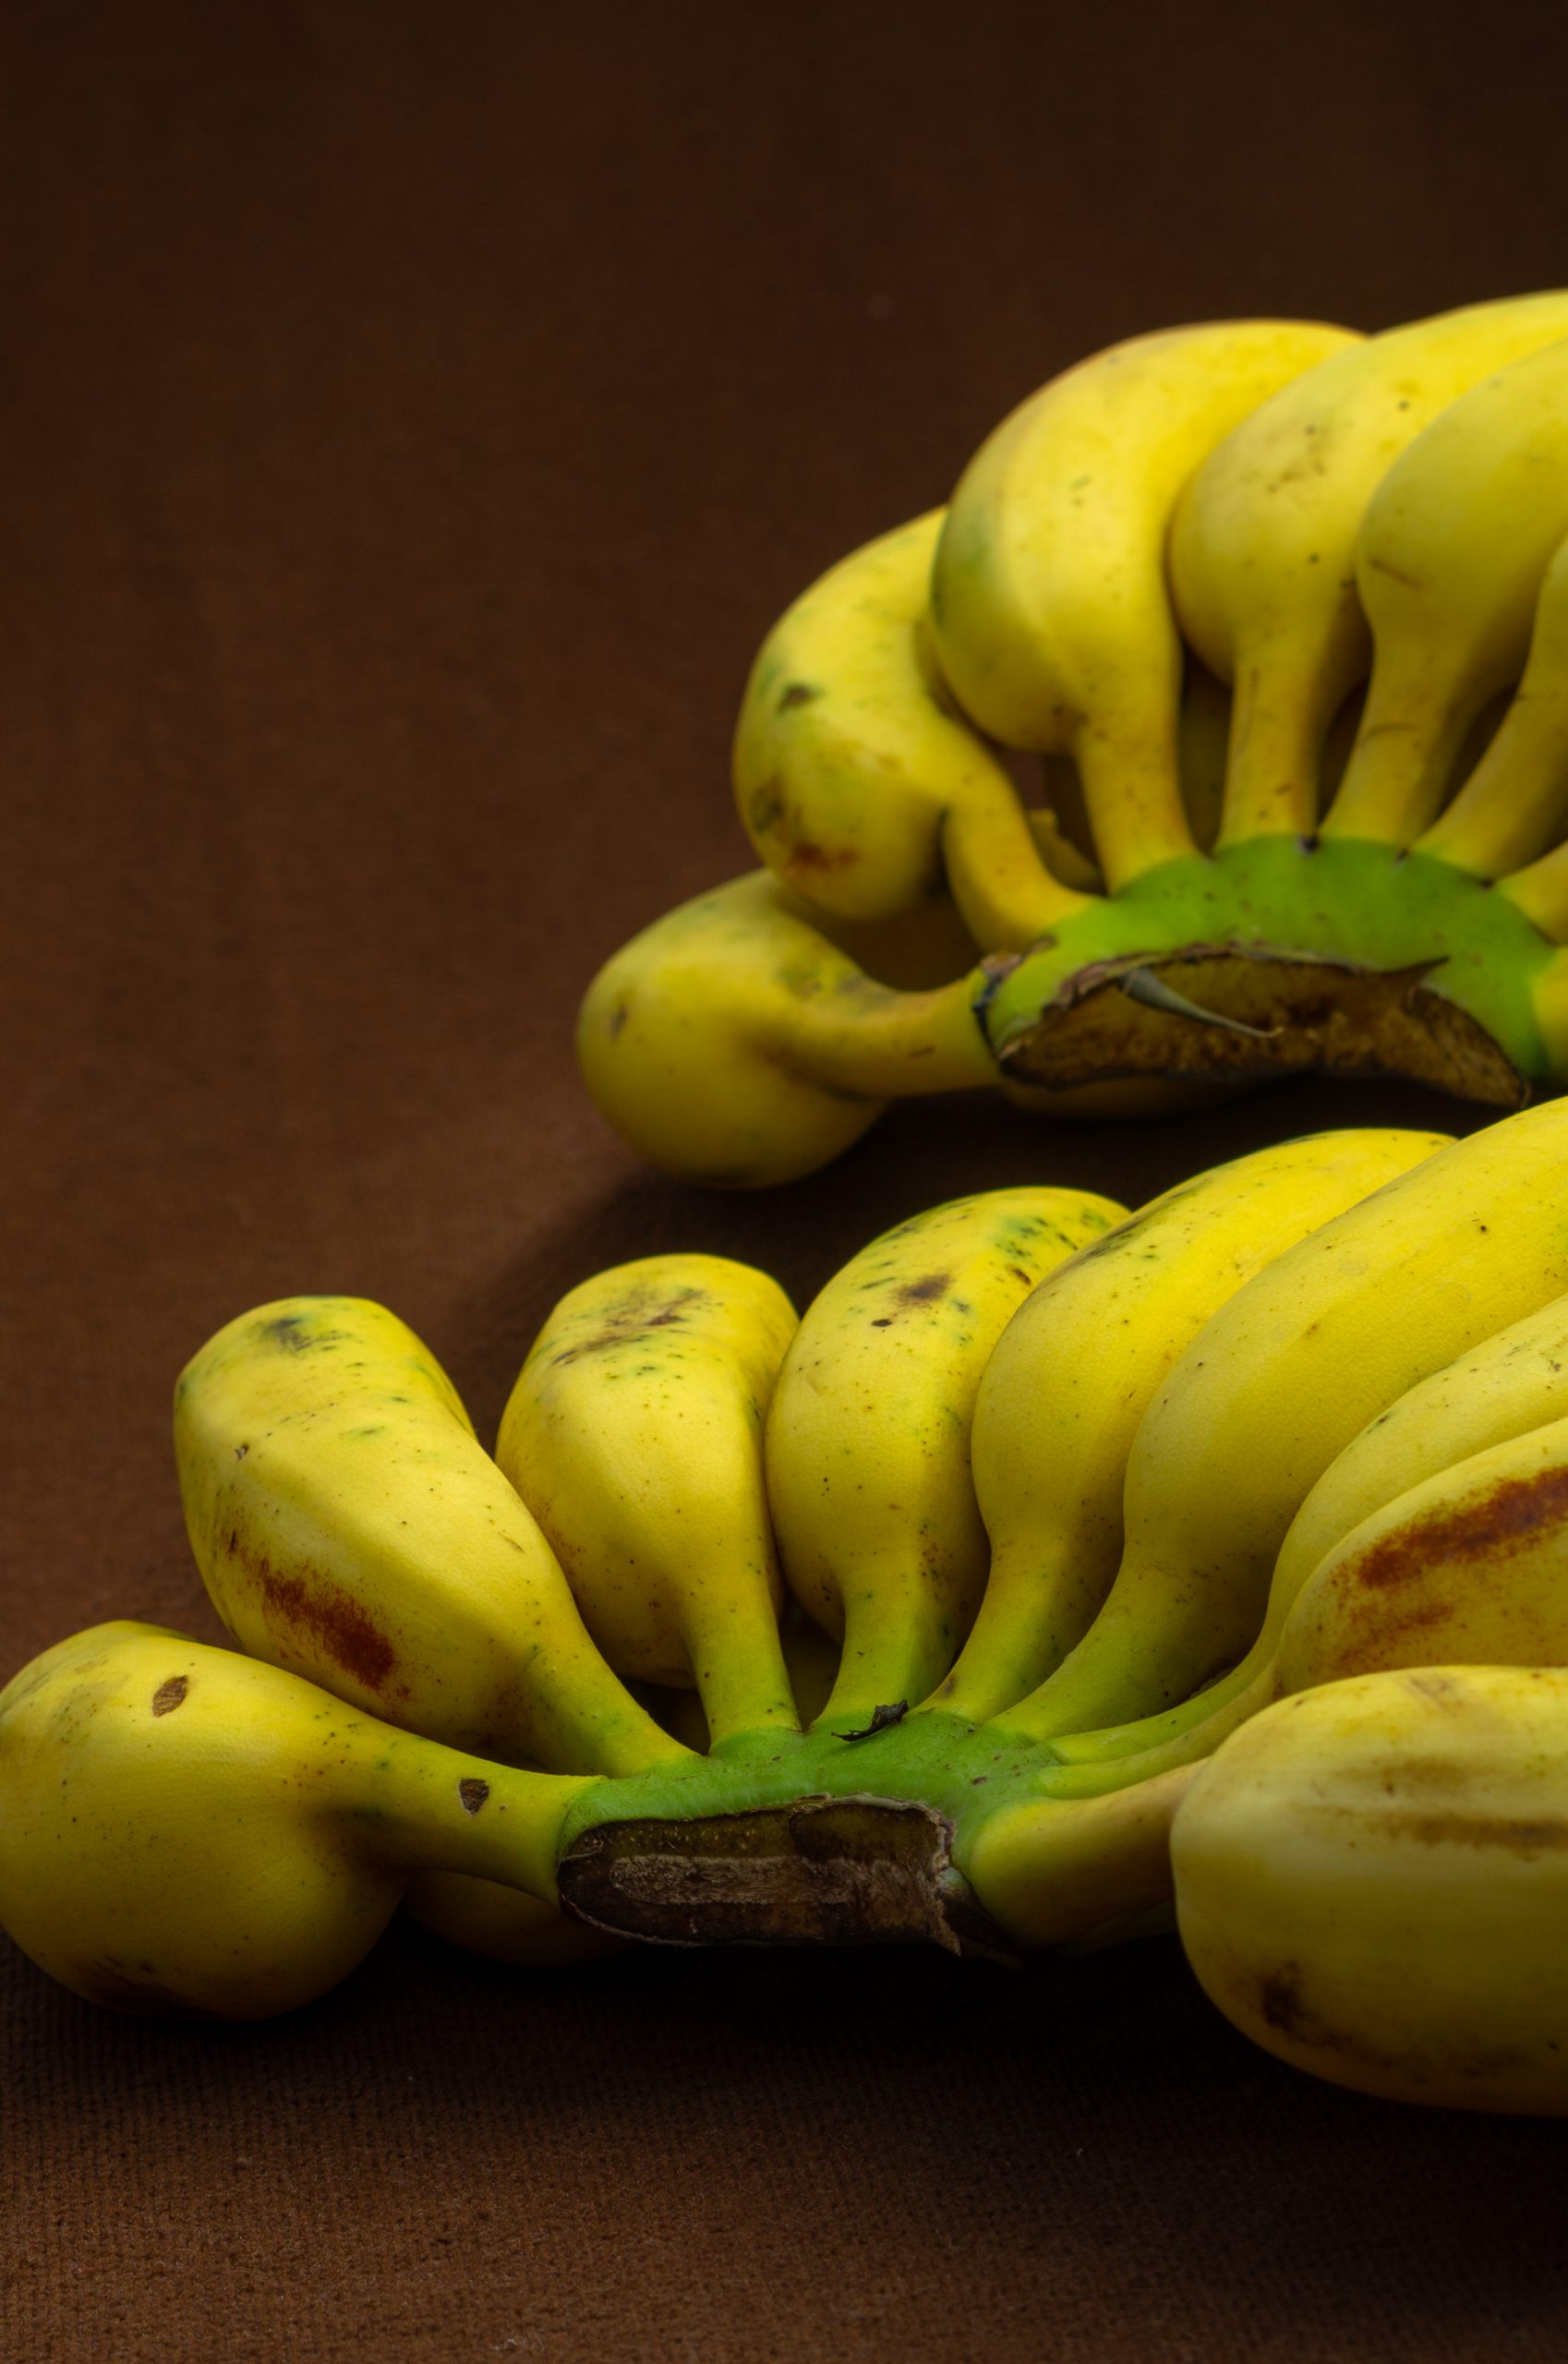 Two bunches of bananas